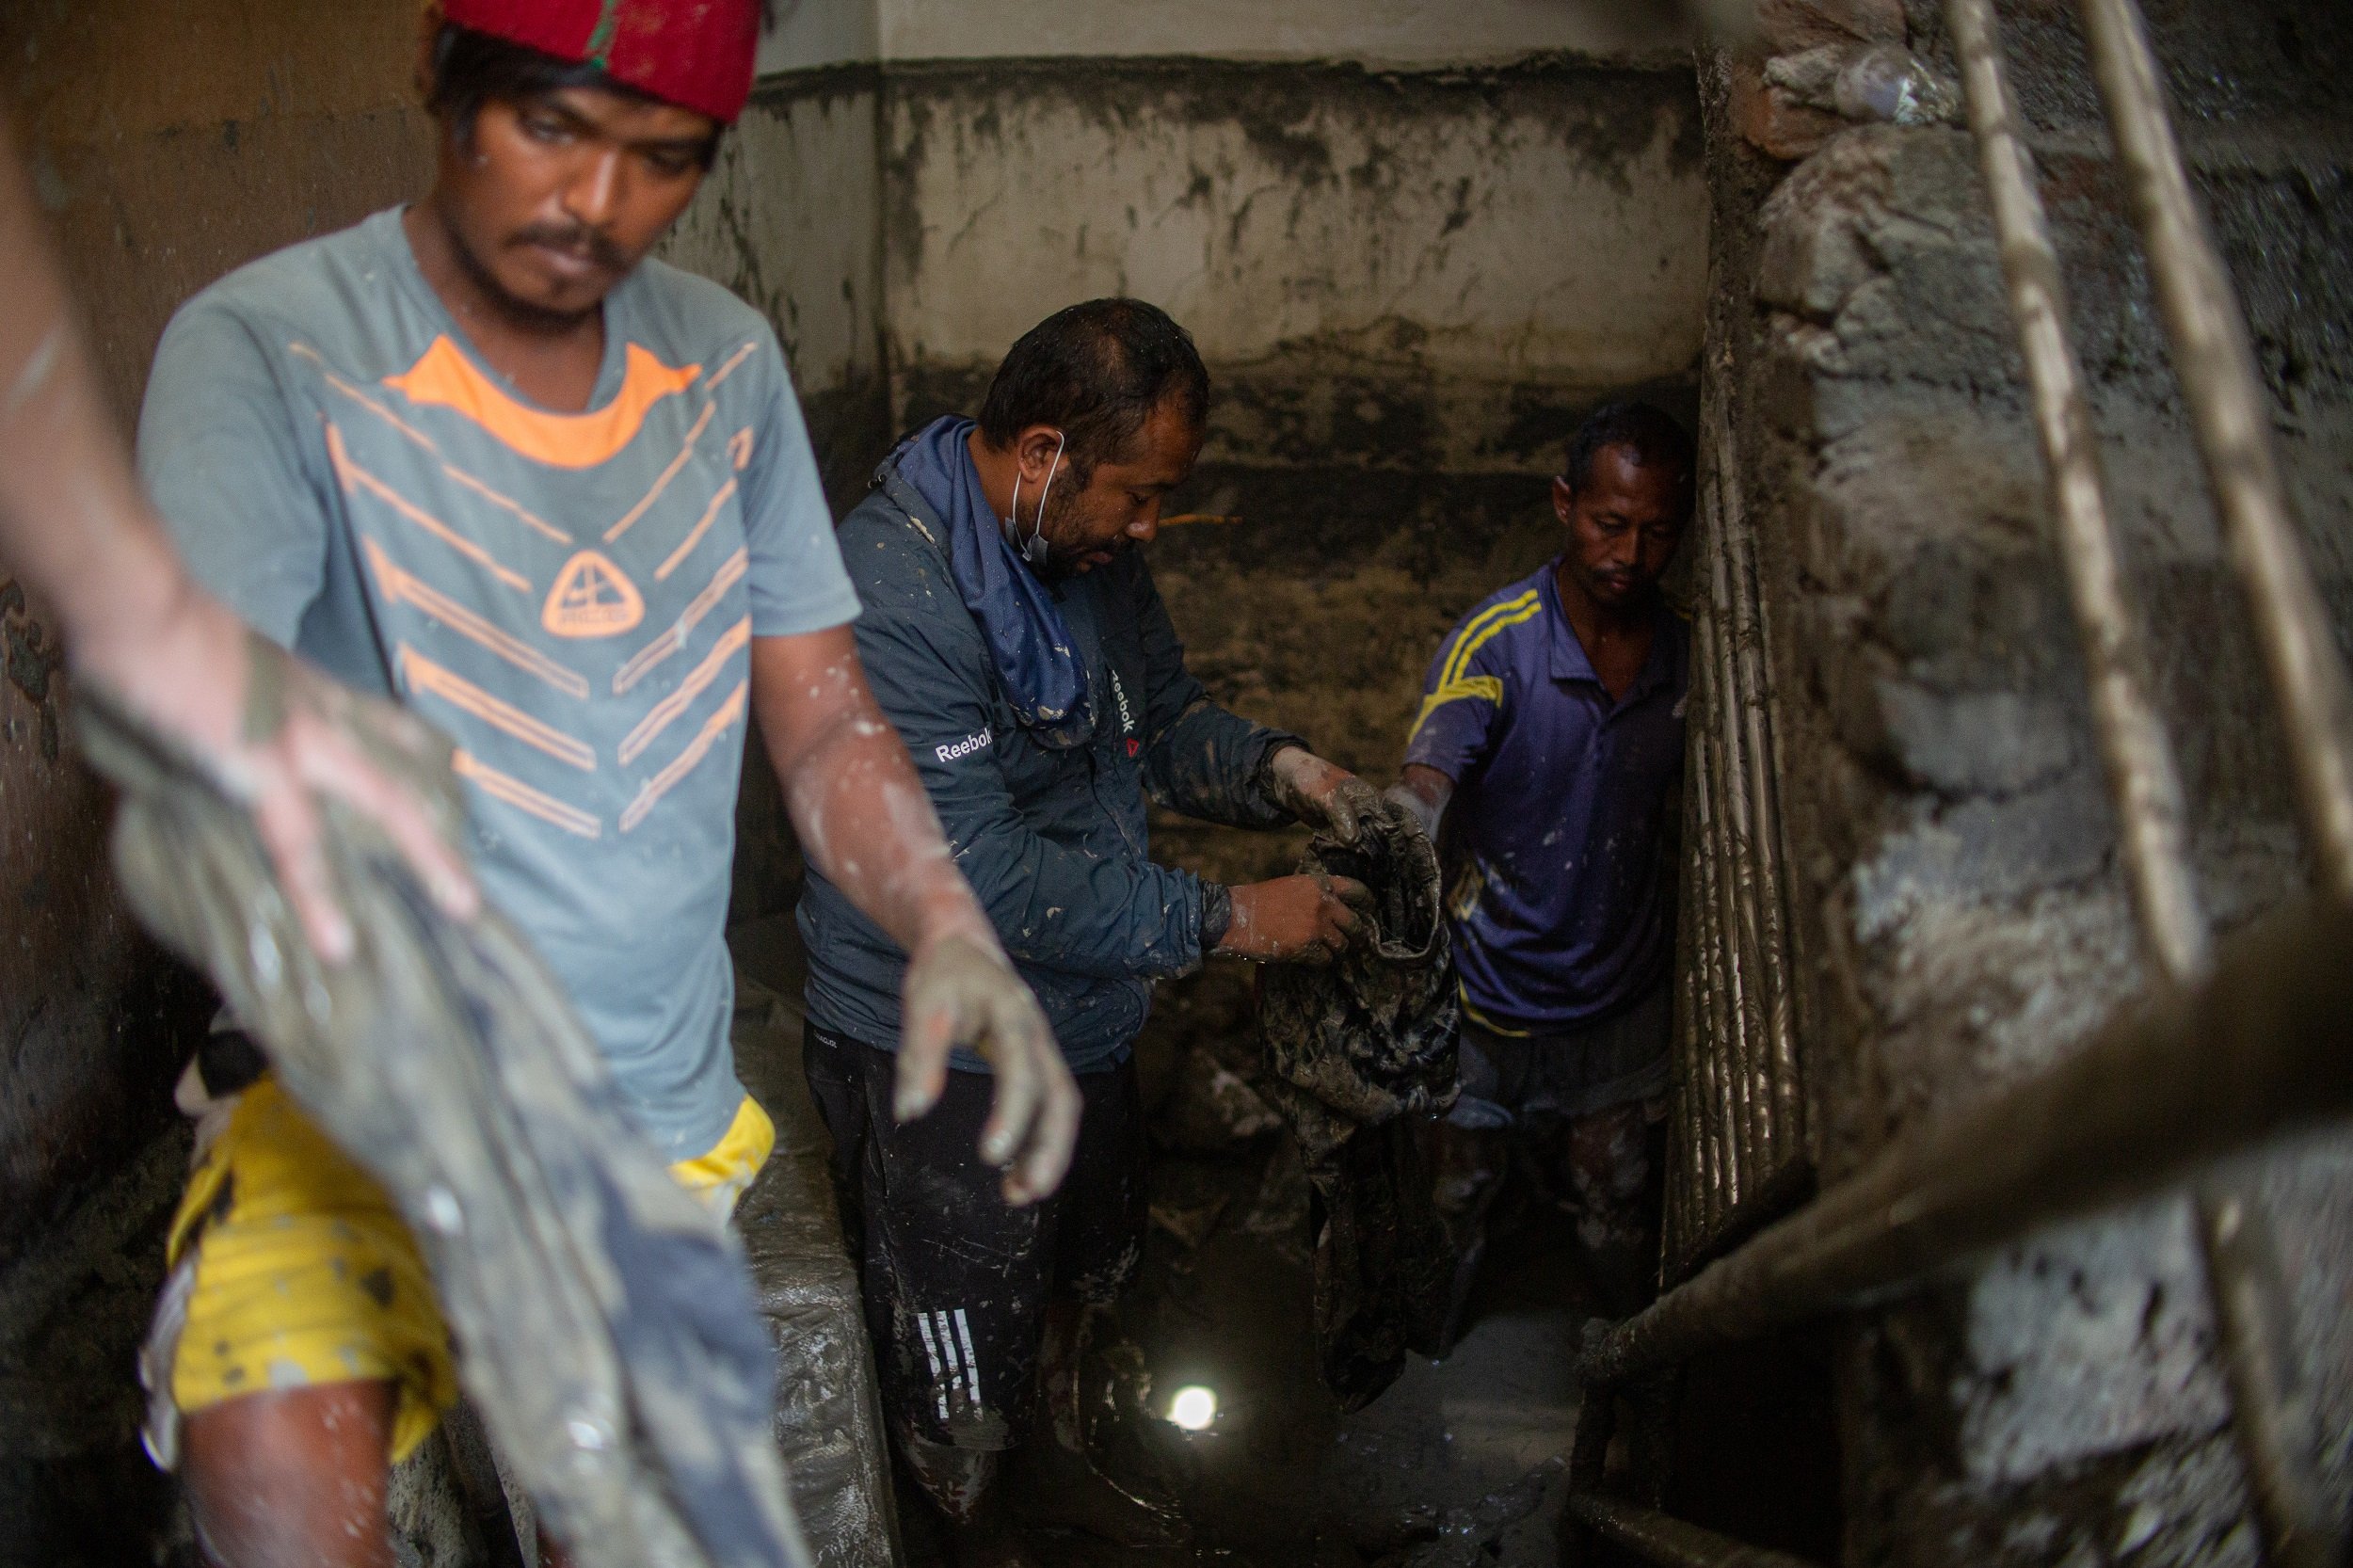 A week after the devastating flood, locals pick up their belongings, coated with mud and debris (Image: Rojan Shrestha)